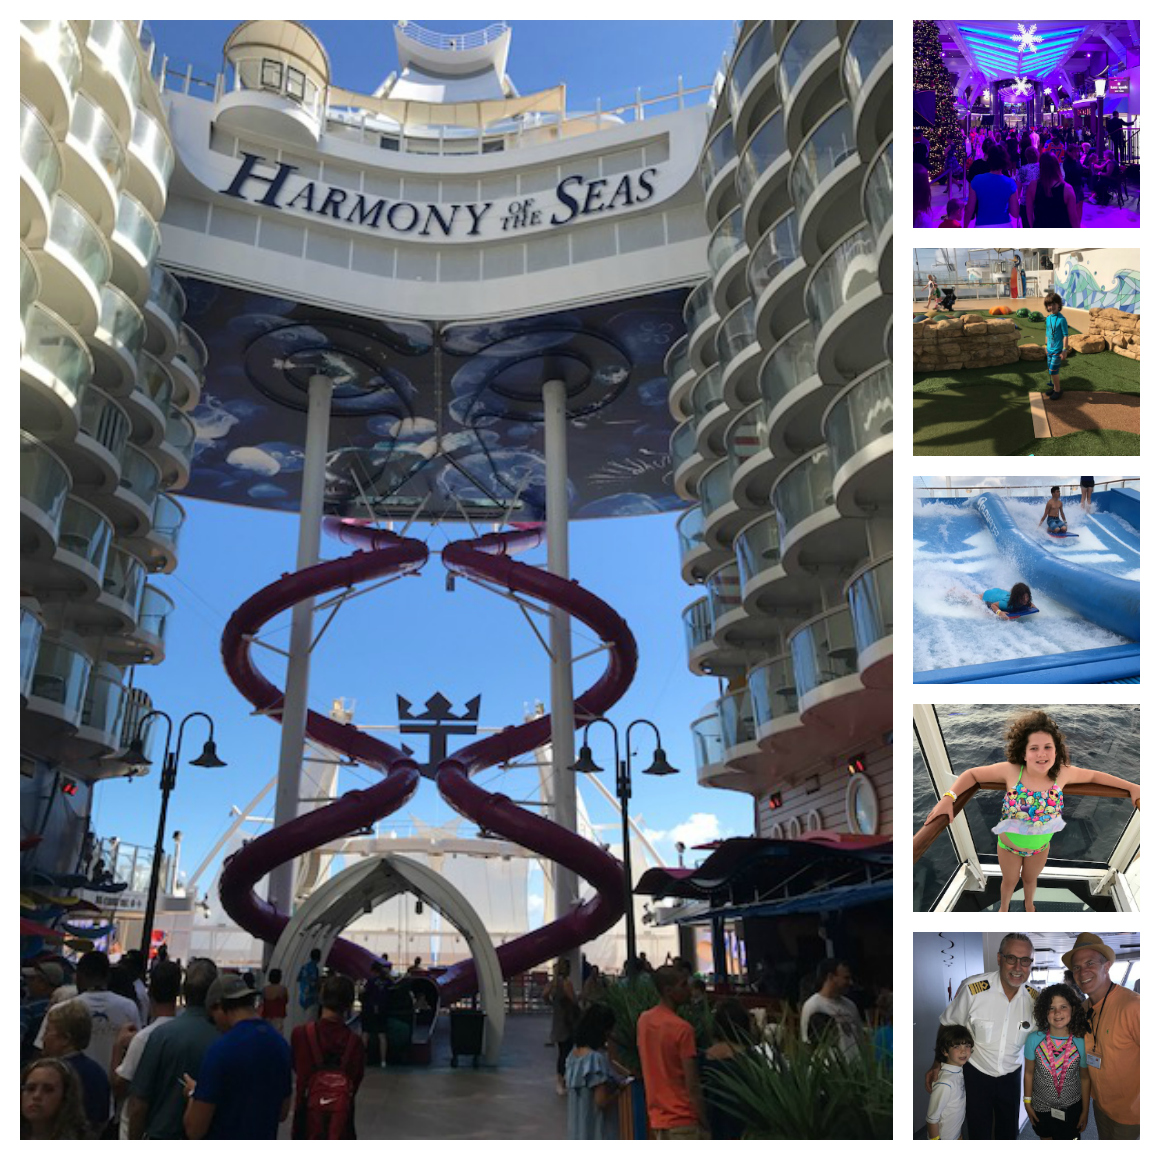 Perfect Family Vacation - Cruise experience on Harmony of the Seas - This ship has it all!!! So much fun for families! ********** Harmony of the Seas family cruise | Best cruise for kids | best cruises for families | Harmony of the seas for kids | Family cruise | Best family cruise | Most fun cruise